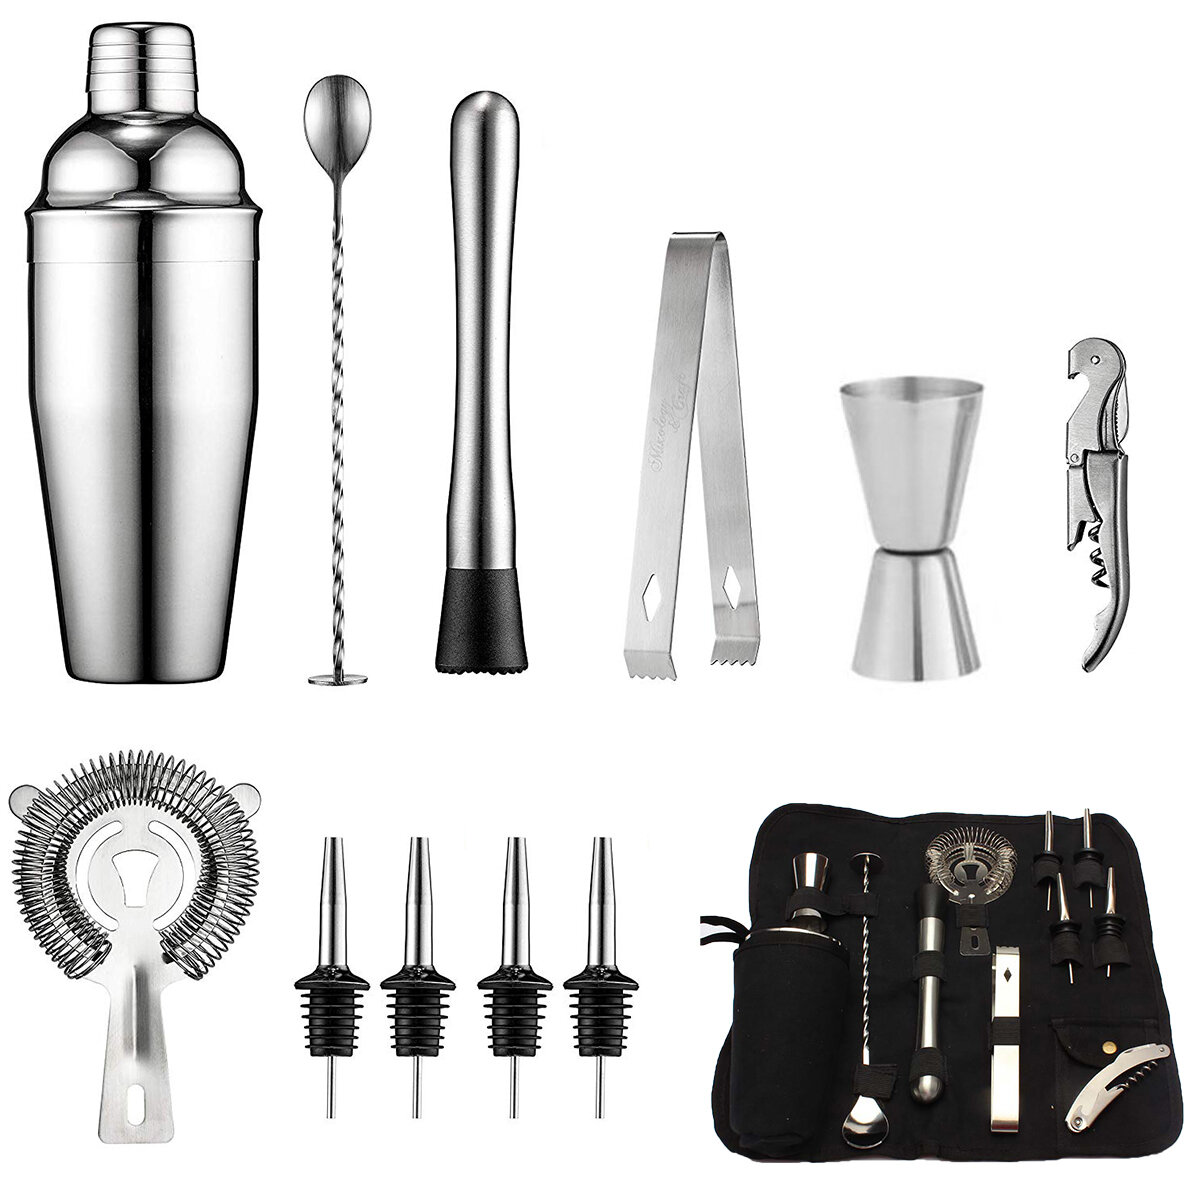 Muti-funtion Stainless Steel Cocktail Shaker Set Ice Tong Mixer Drink Bartender Browser Kit Bars Set Professional Barten